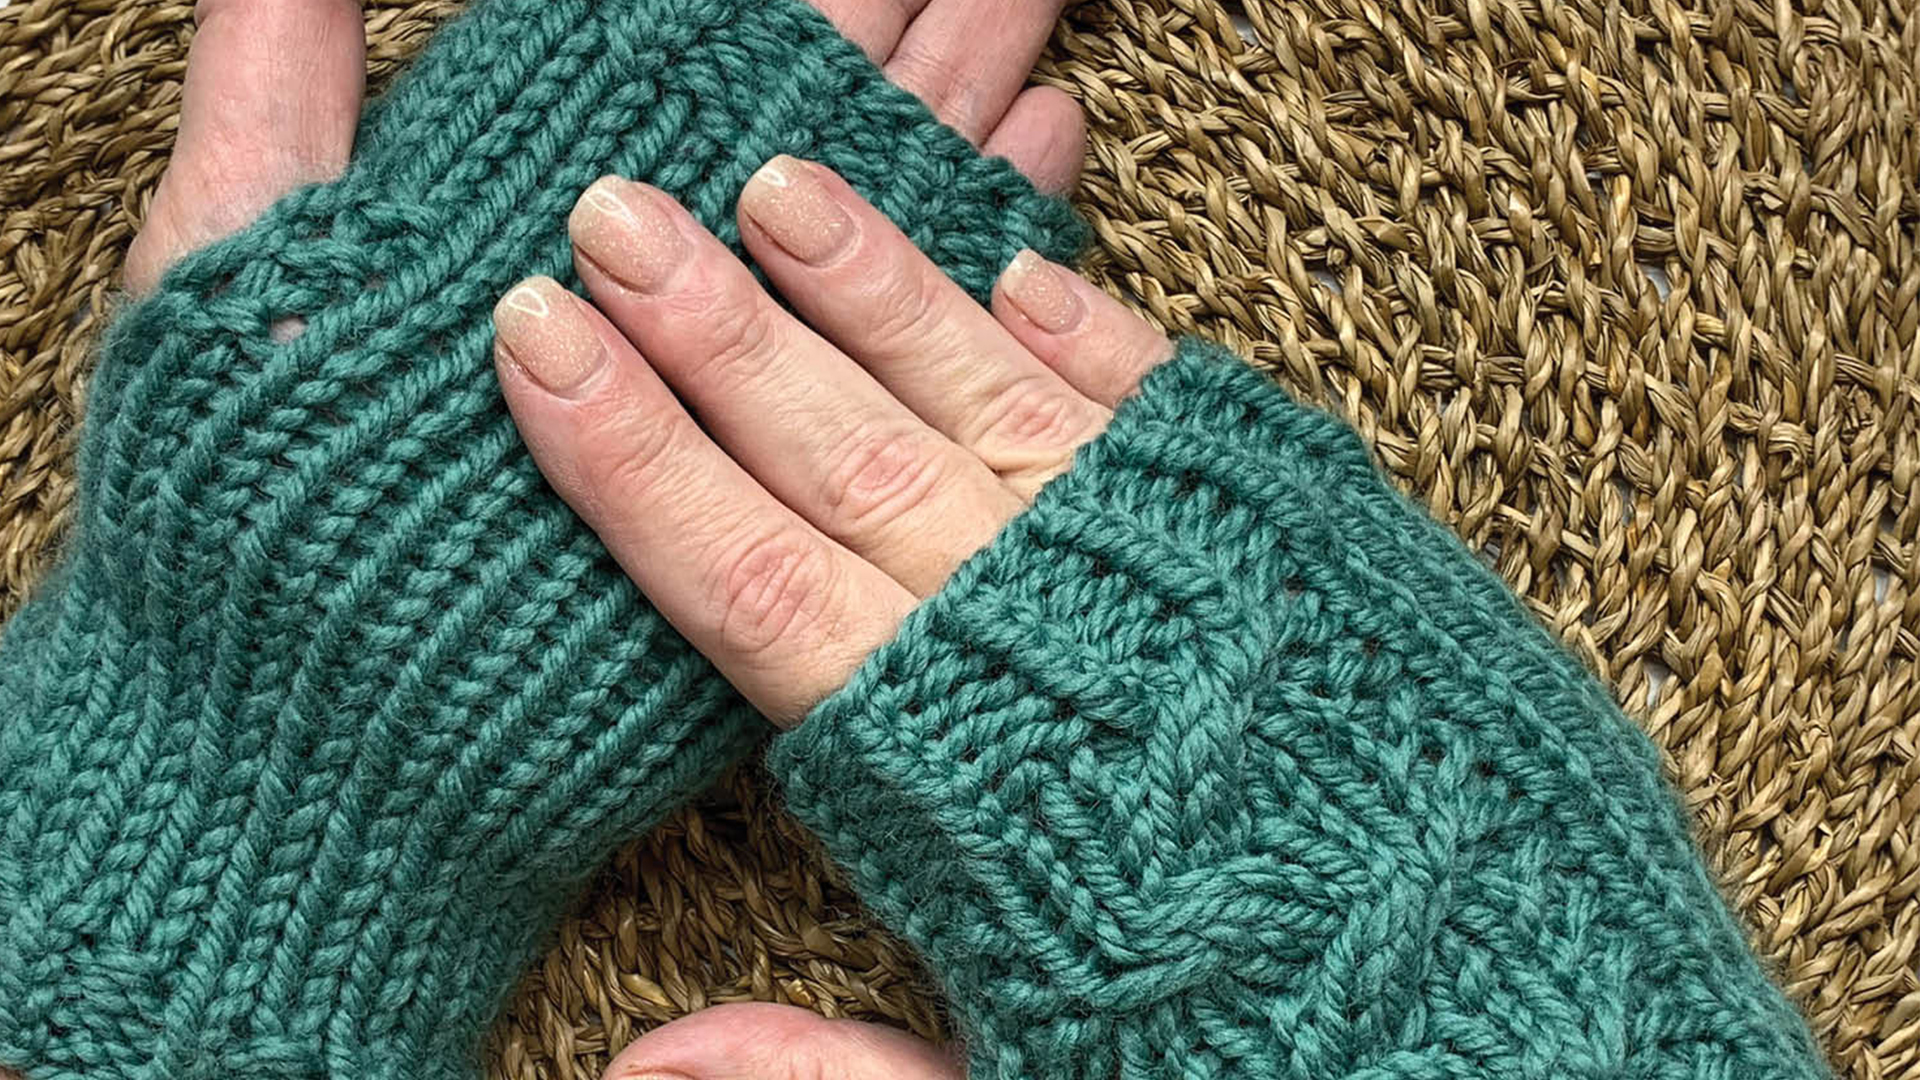 Free Knitting Pattern - Braided Cable Mitts